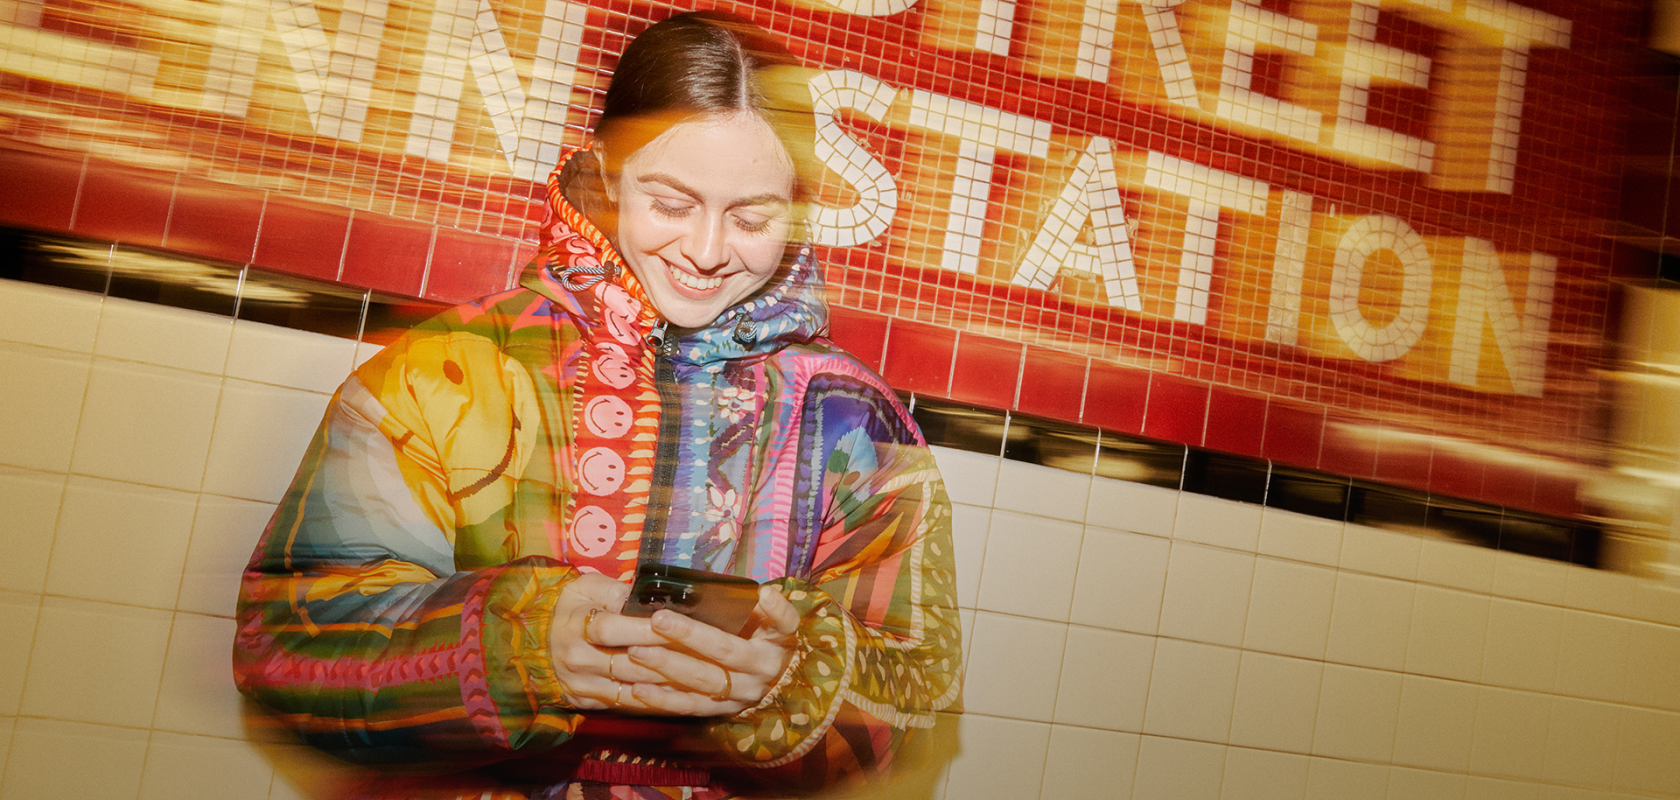 A person smiling while looking at a phone in a subway station, wearing a Smiley x Farm Rio coat.